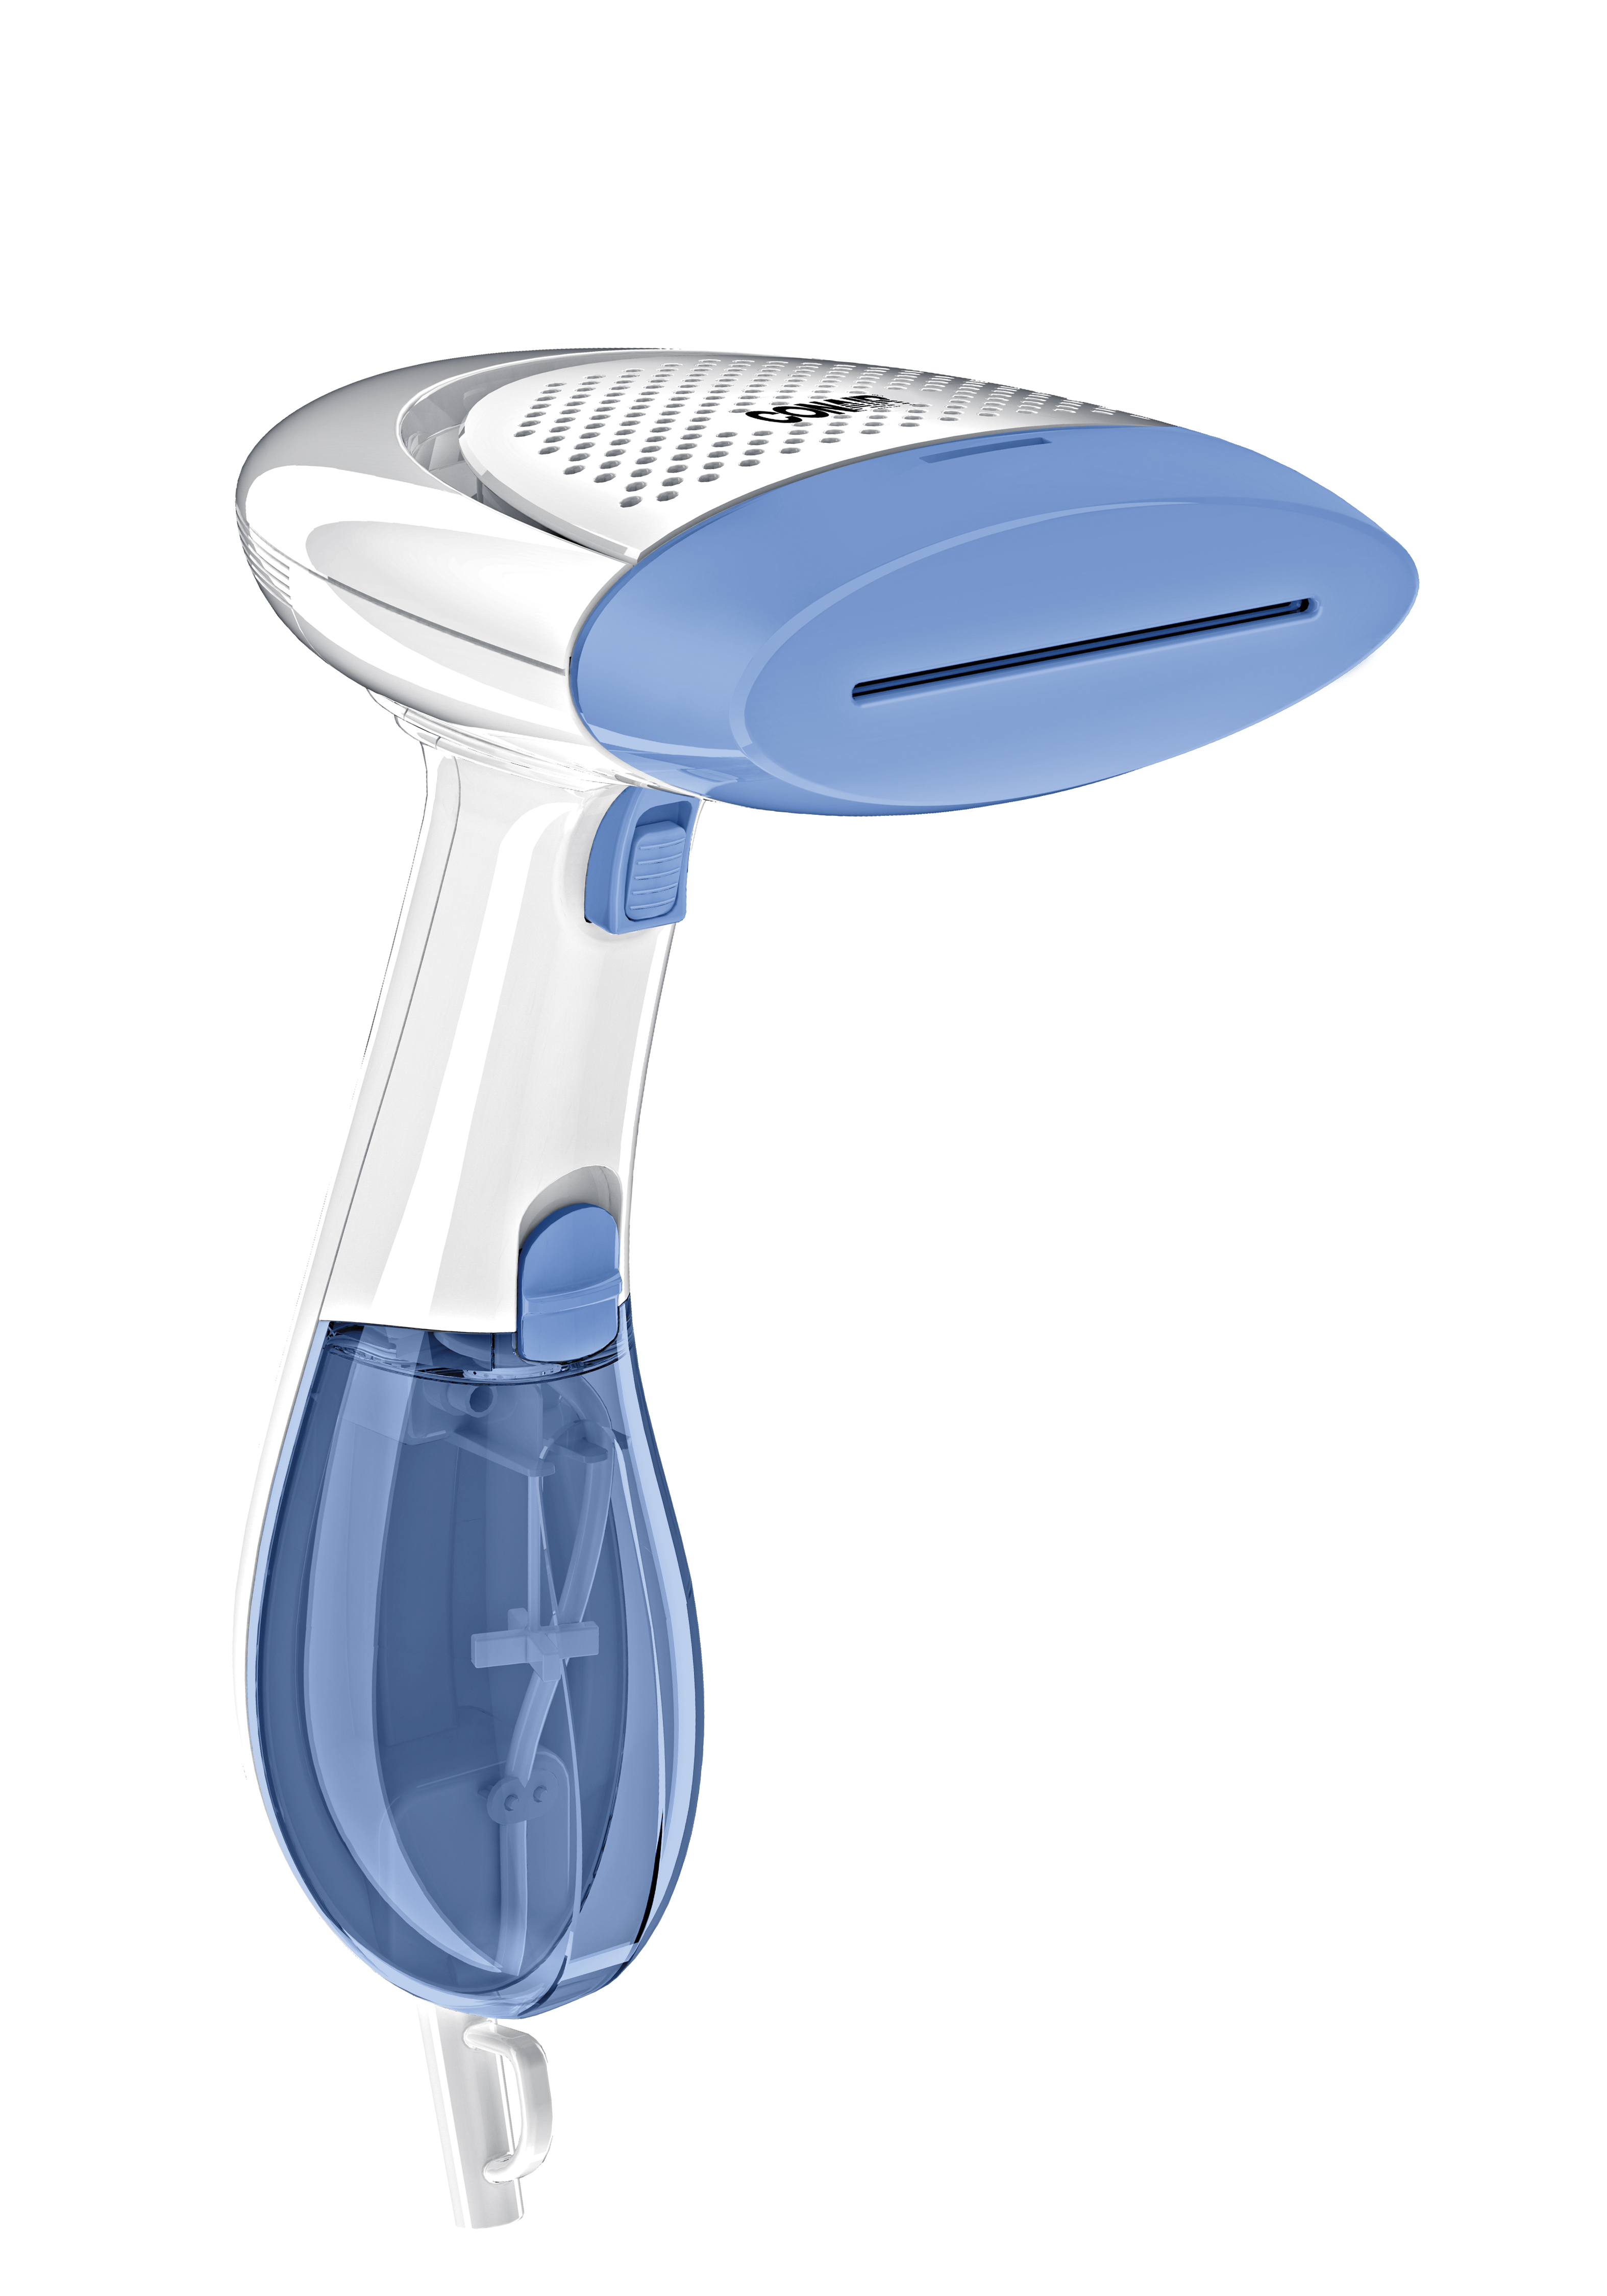 Conair Handheld Garment Steamer for Clothes, ExtremeSteam 1200W, Portable Handheld Design, White/Blue, GS237X - image 1 of 13